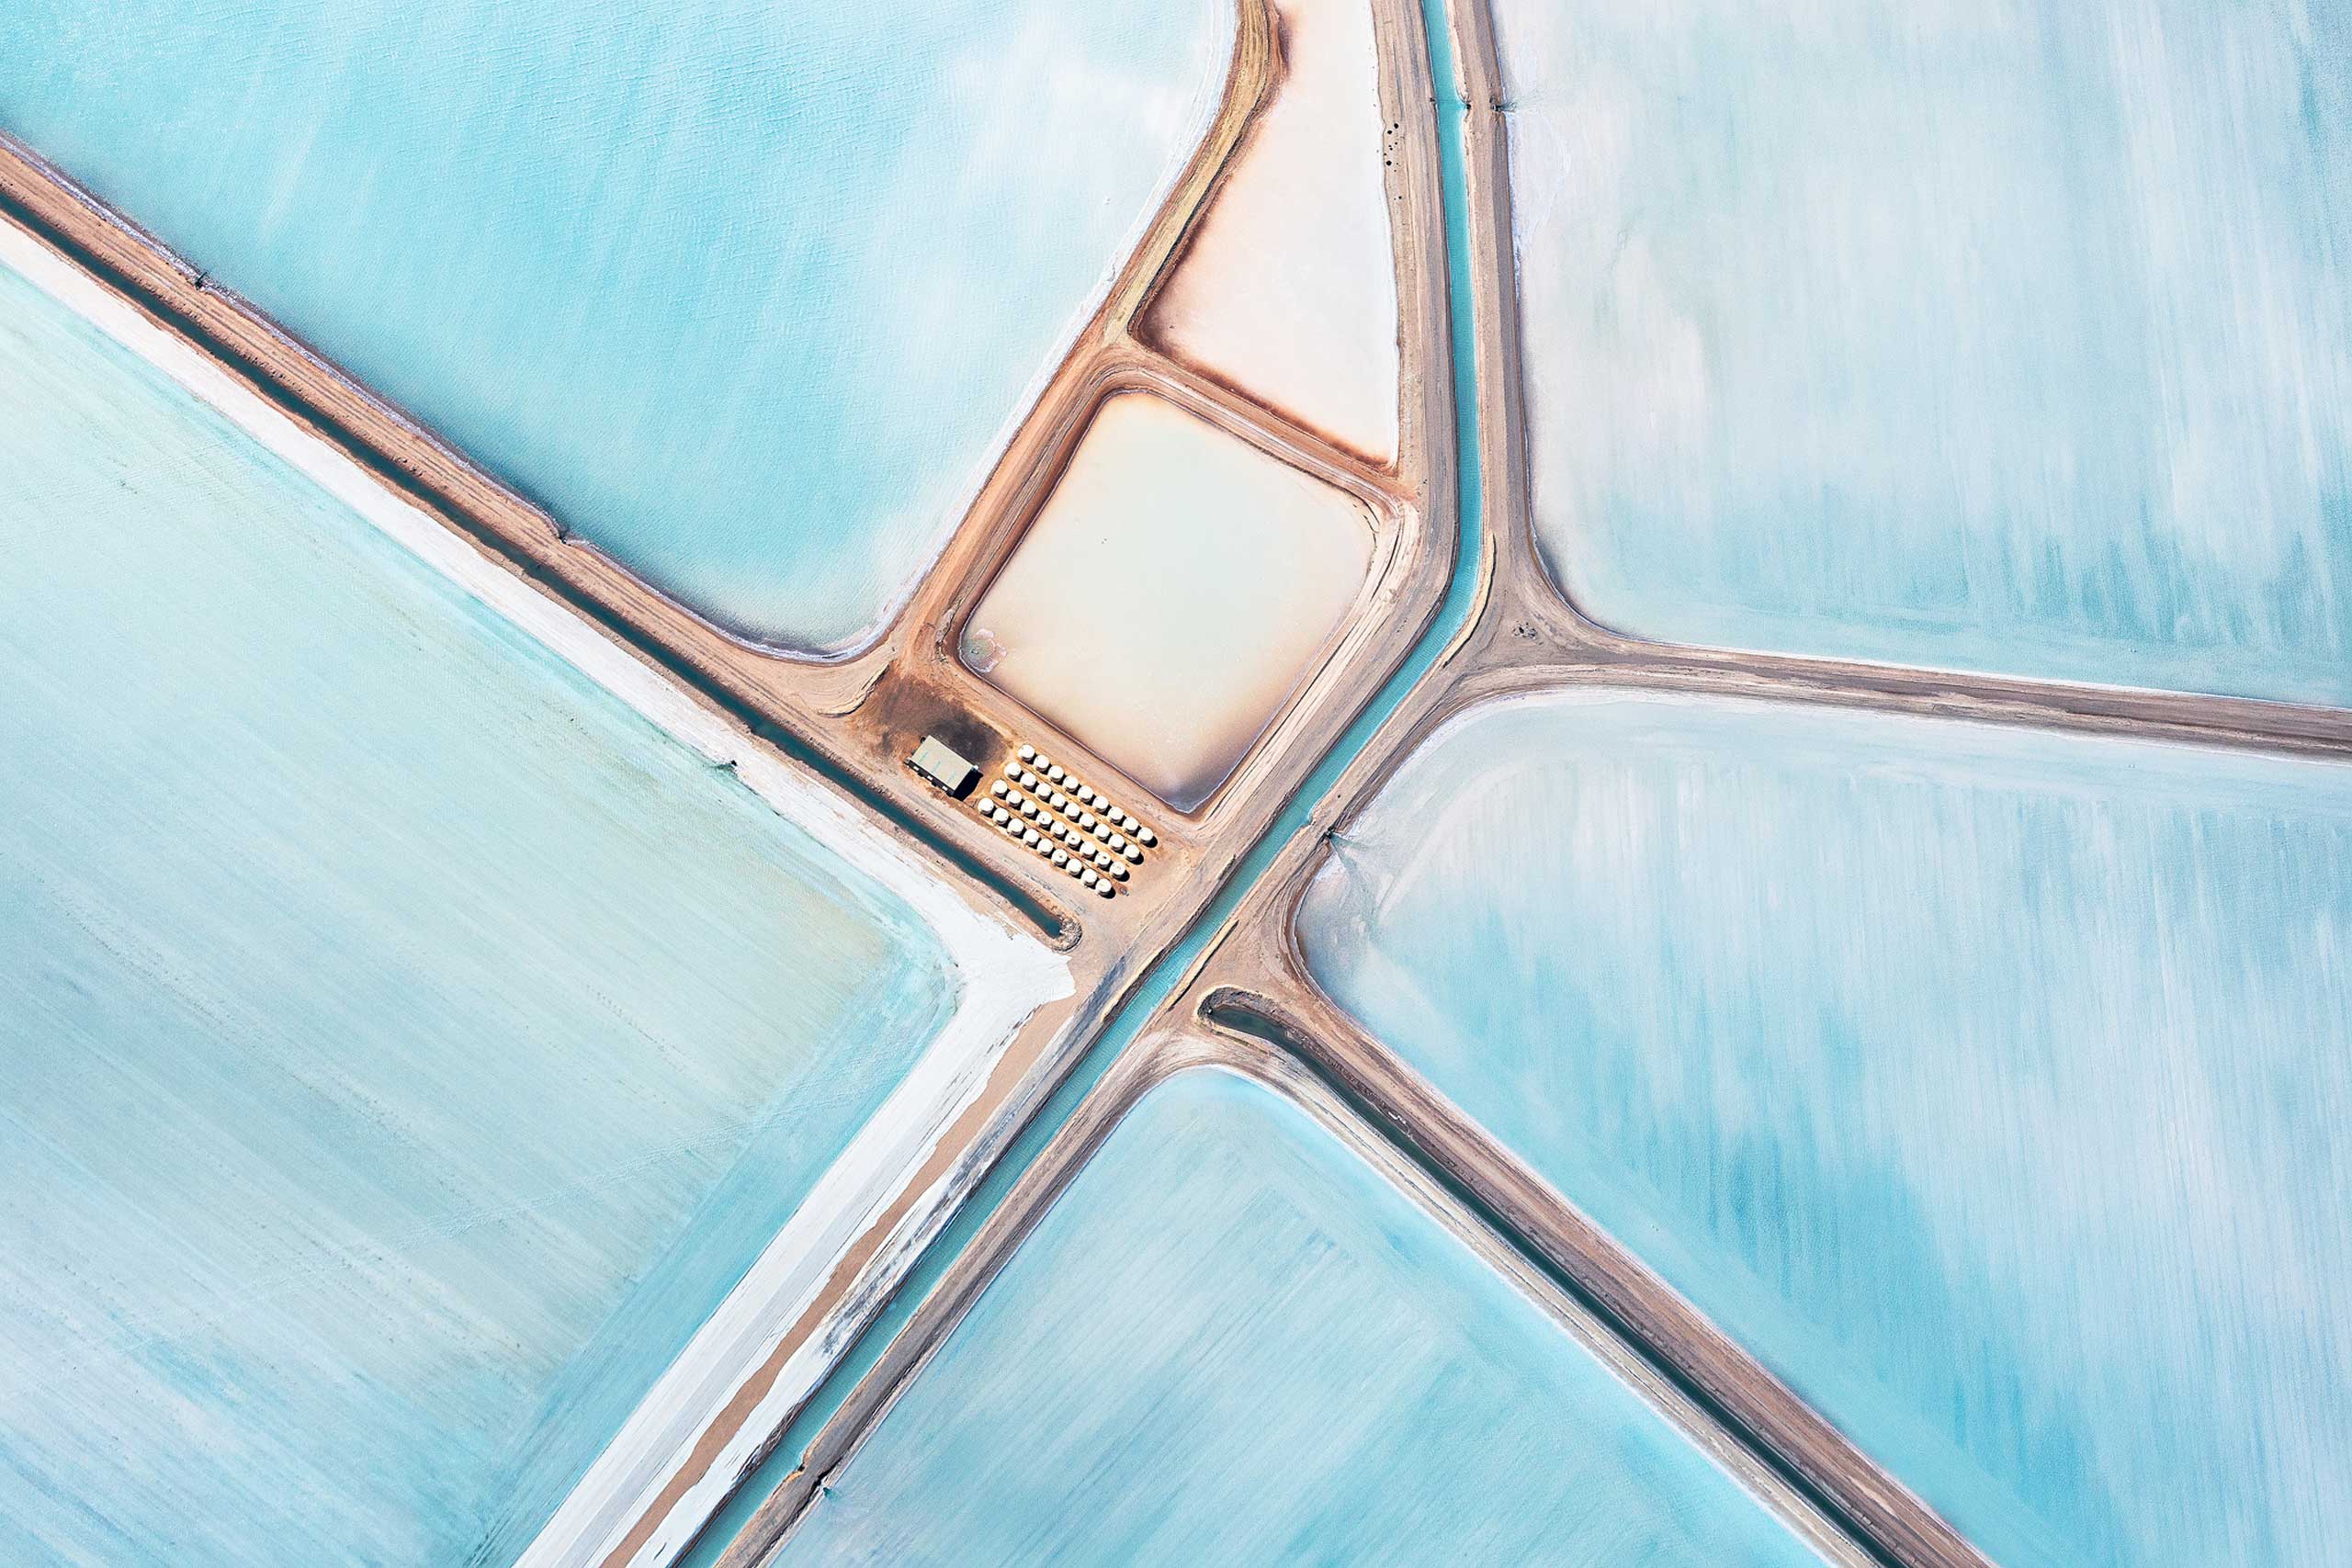 Nominated in the Landscape category. Simon Butterworth's aerial work on a solar salt operation in Australia.